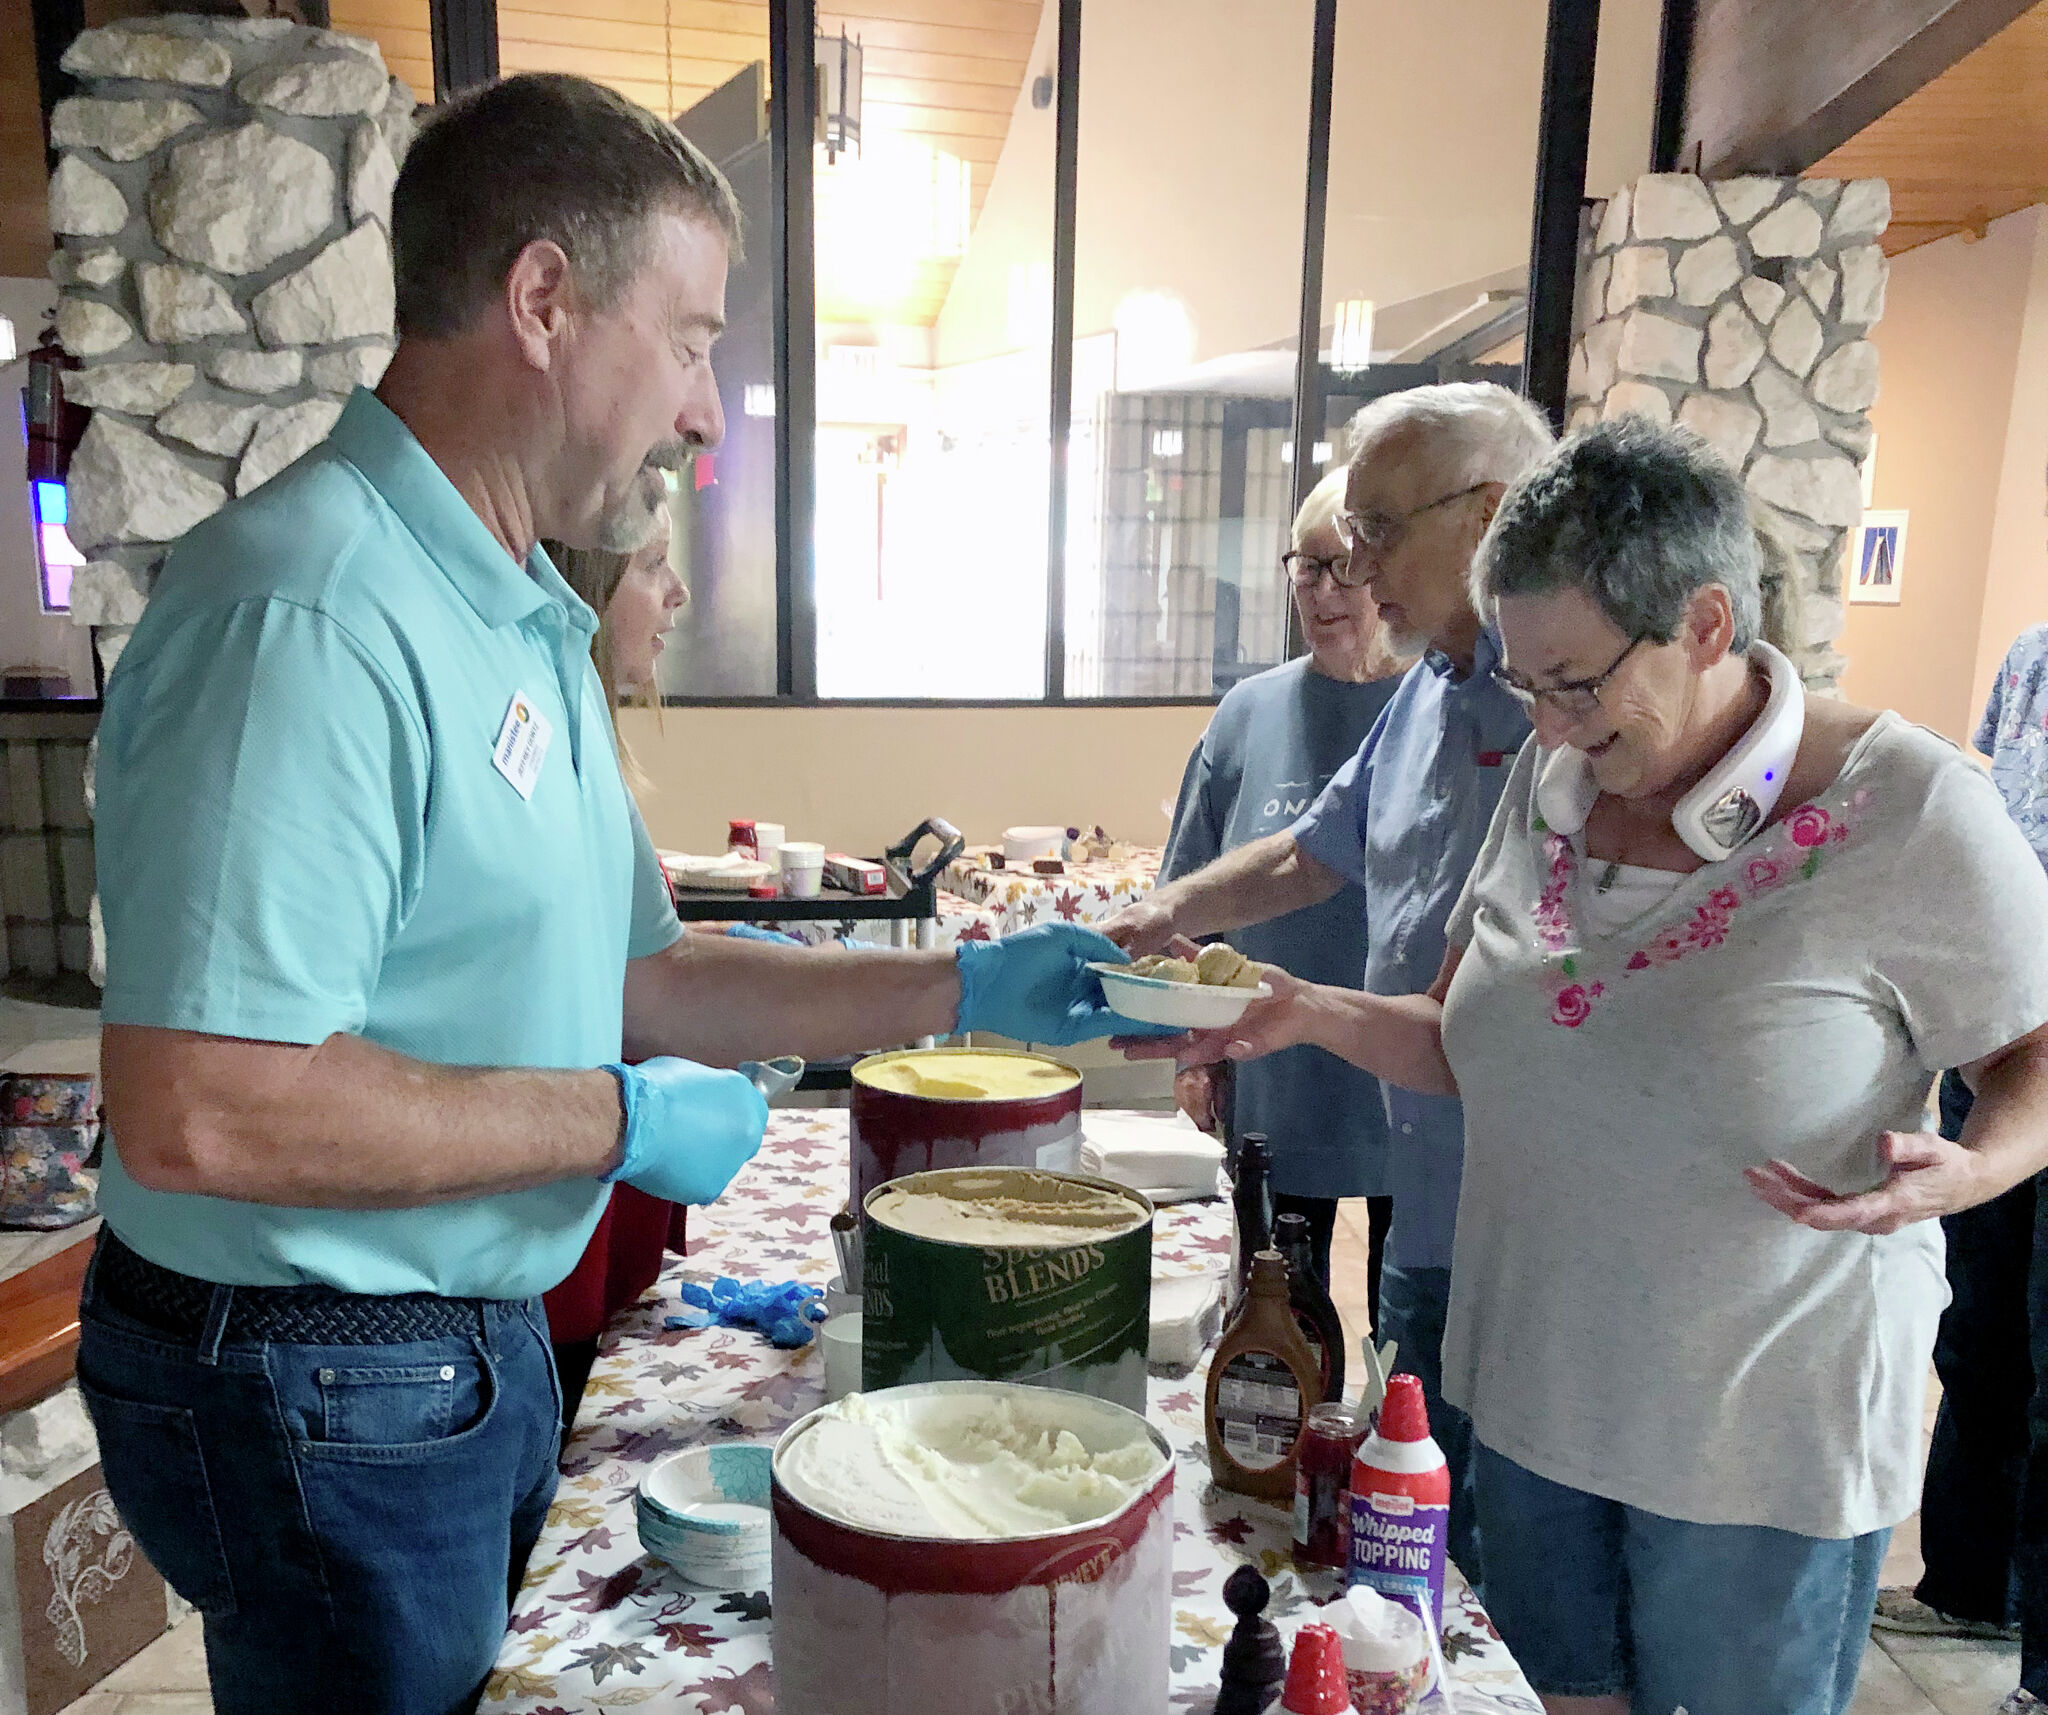 OPINION: National Senior Center month celebrated with ice cream